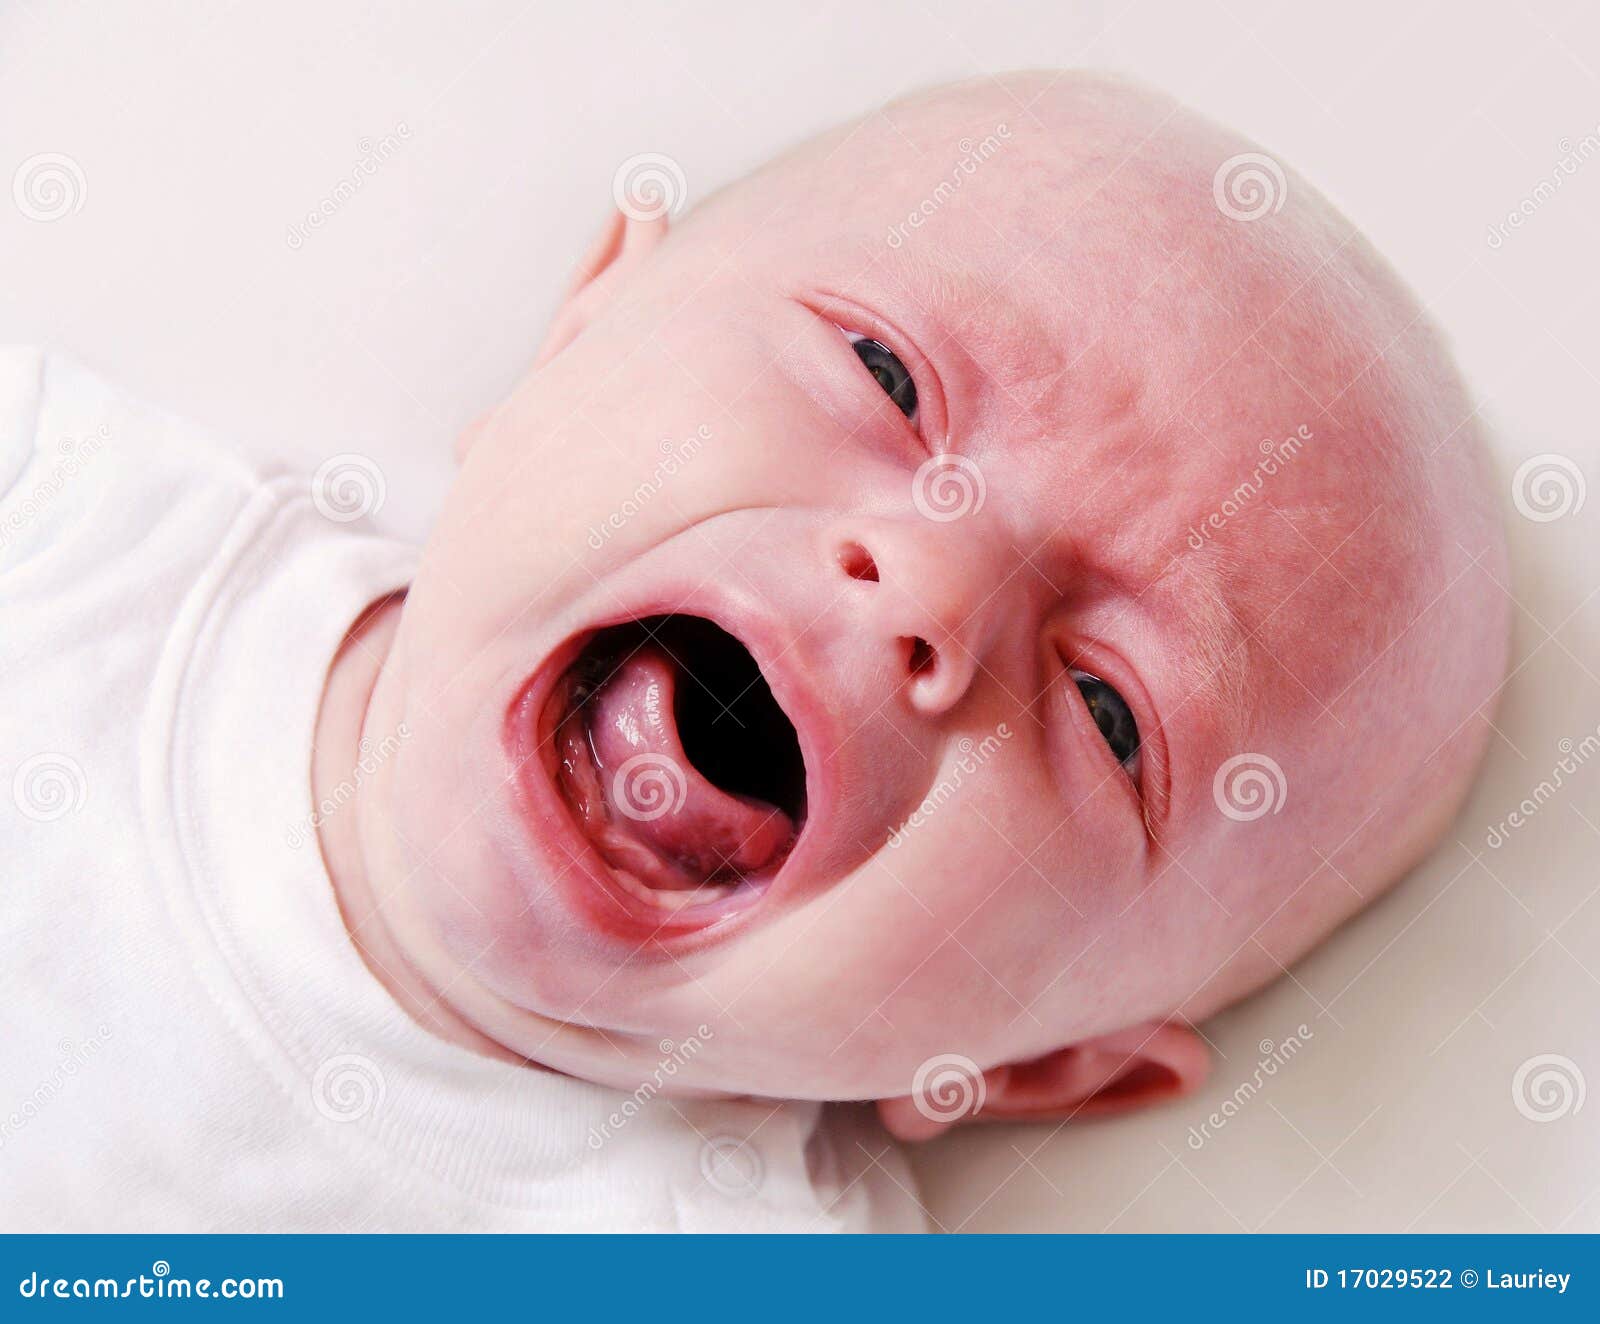 Colicy Baby Crying stock photo. Image of colic, infant ...